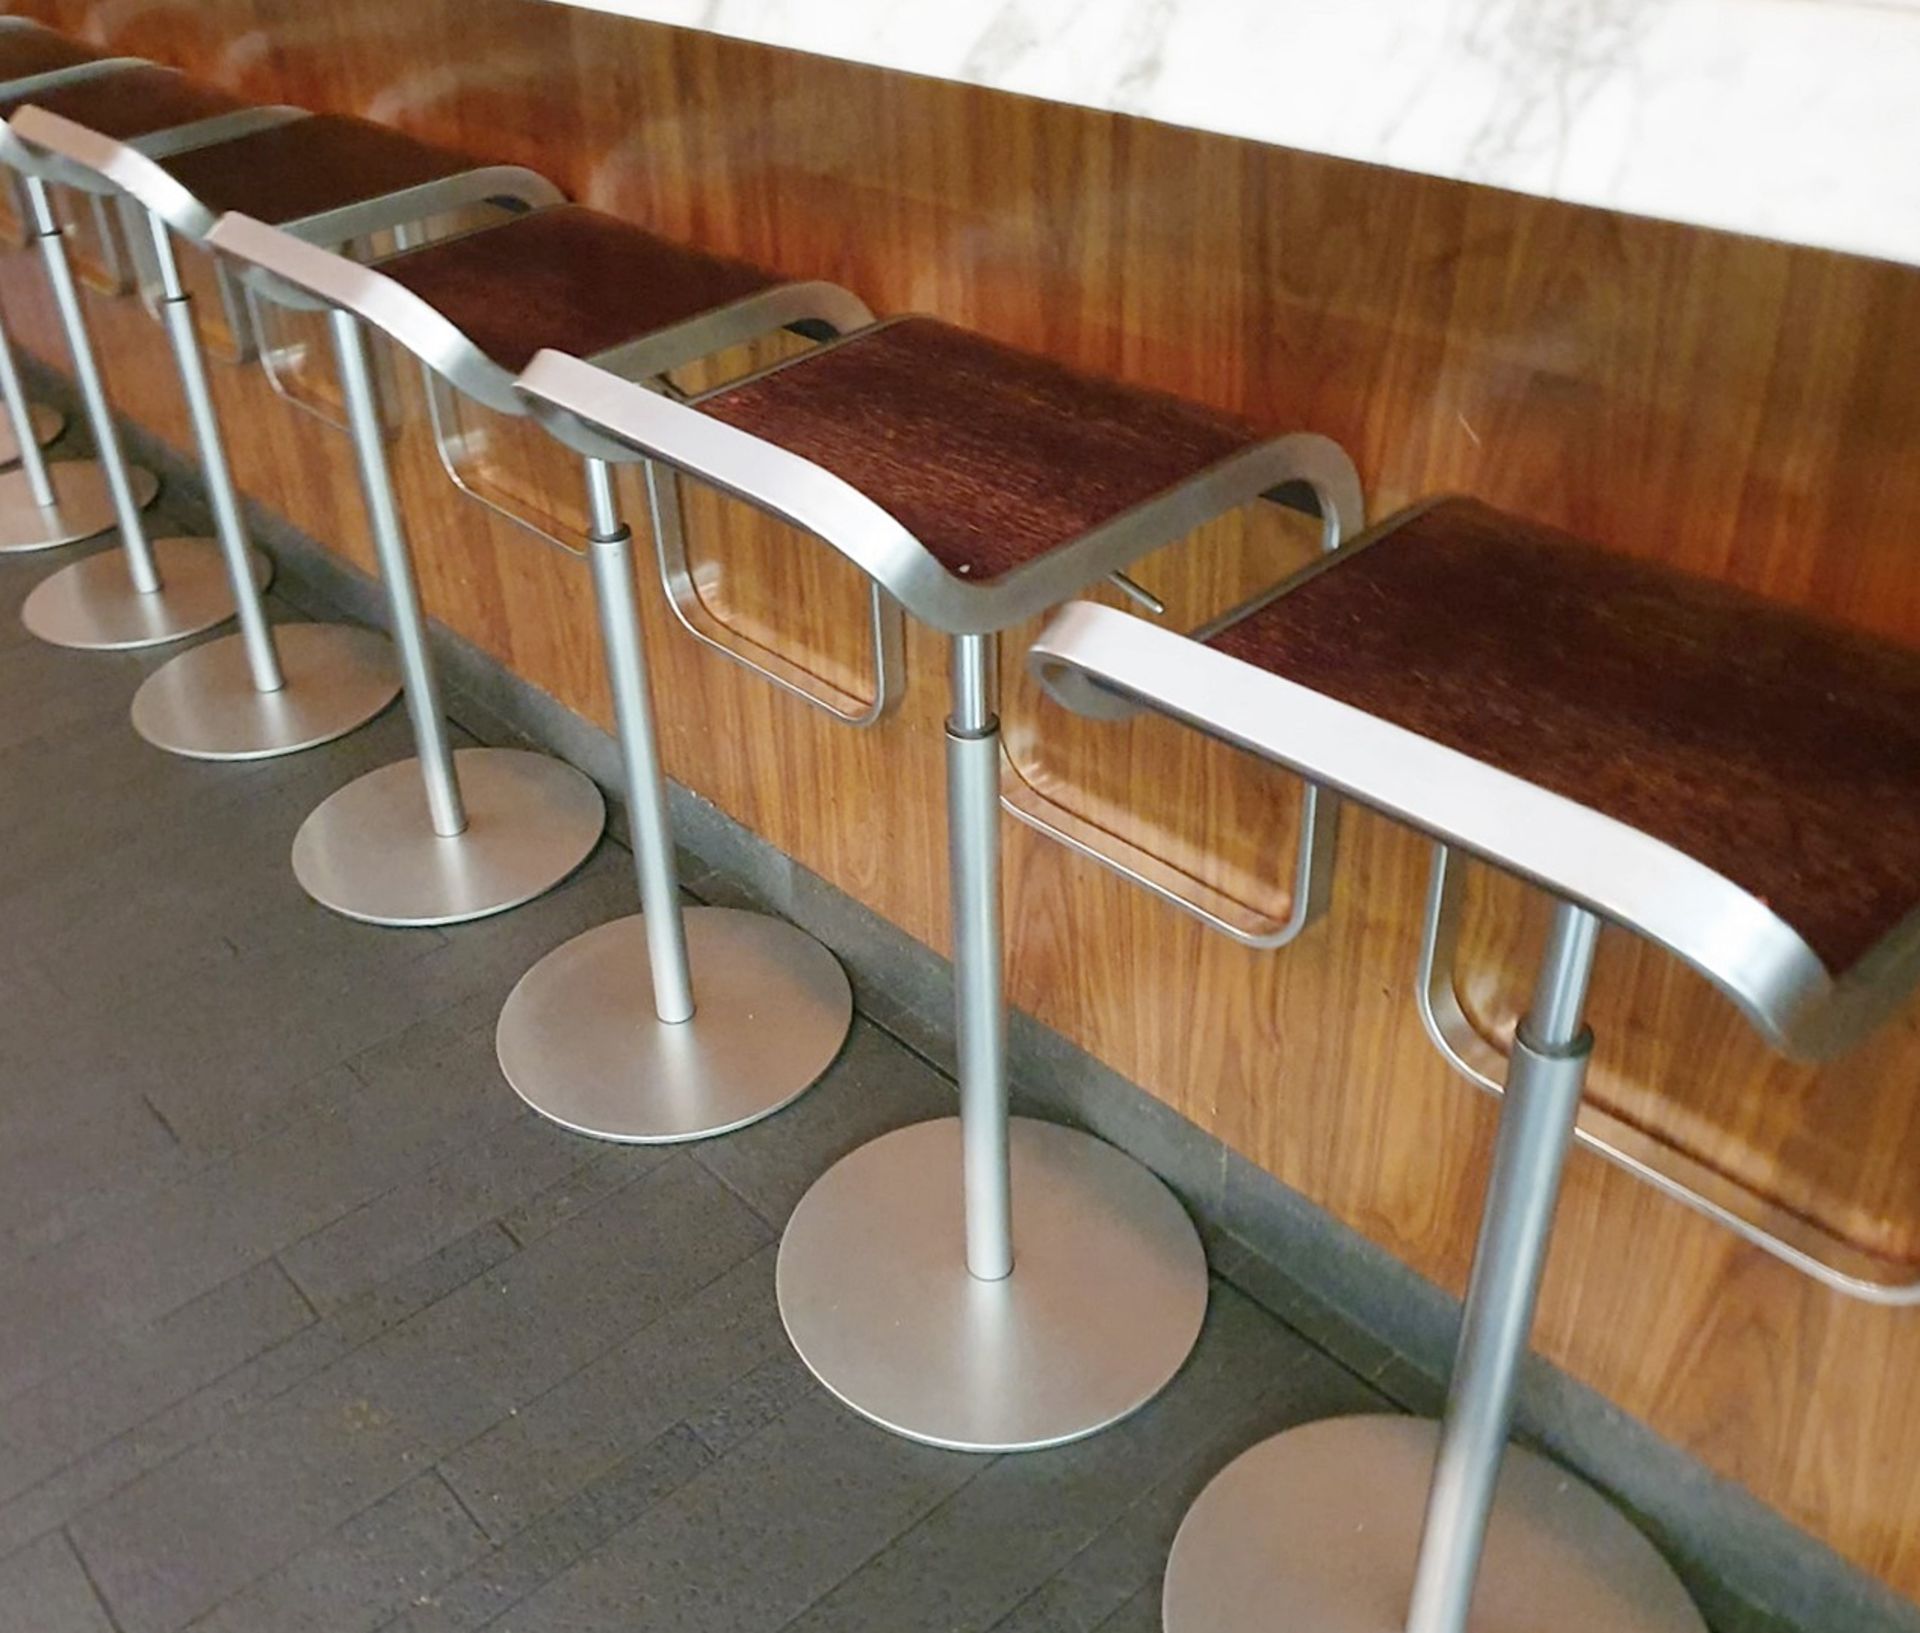 6 x Heavy Duty Commercial Bar Stools With Adjustable Hydraulic Aided Height - Dimensions: 35cm x - Image 2 of 7